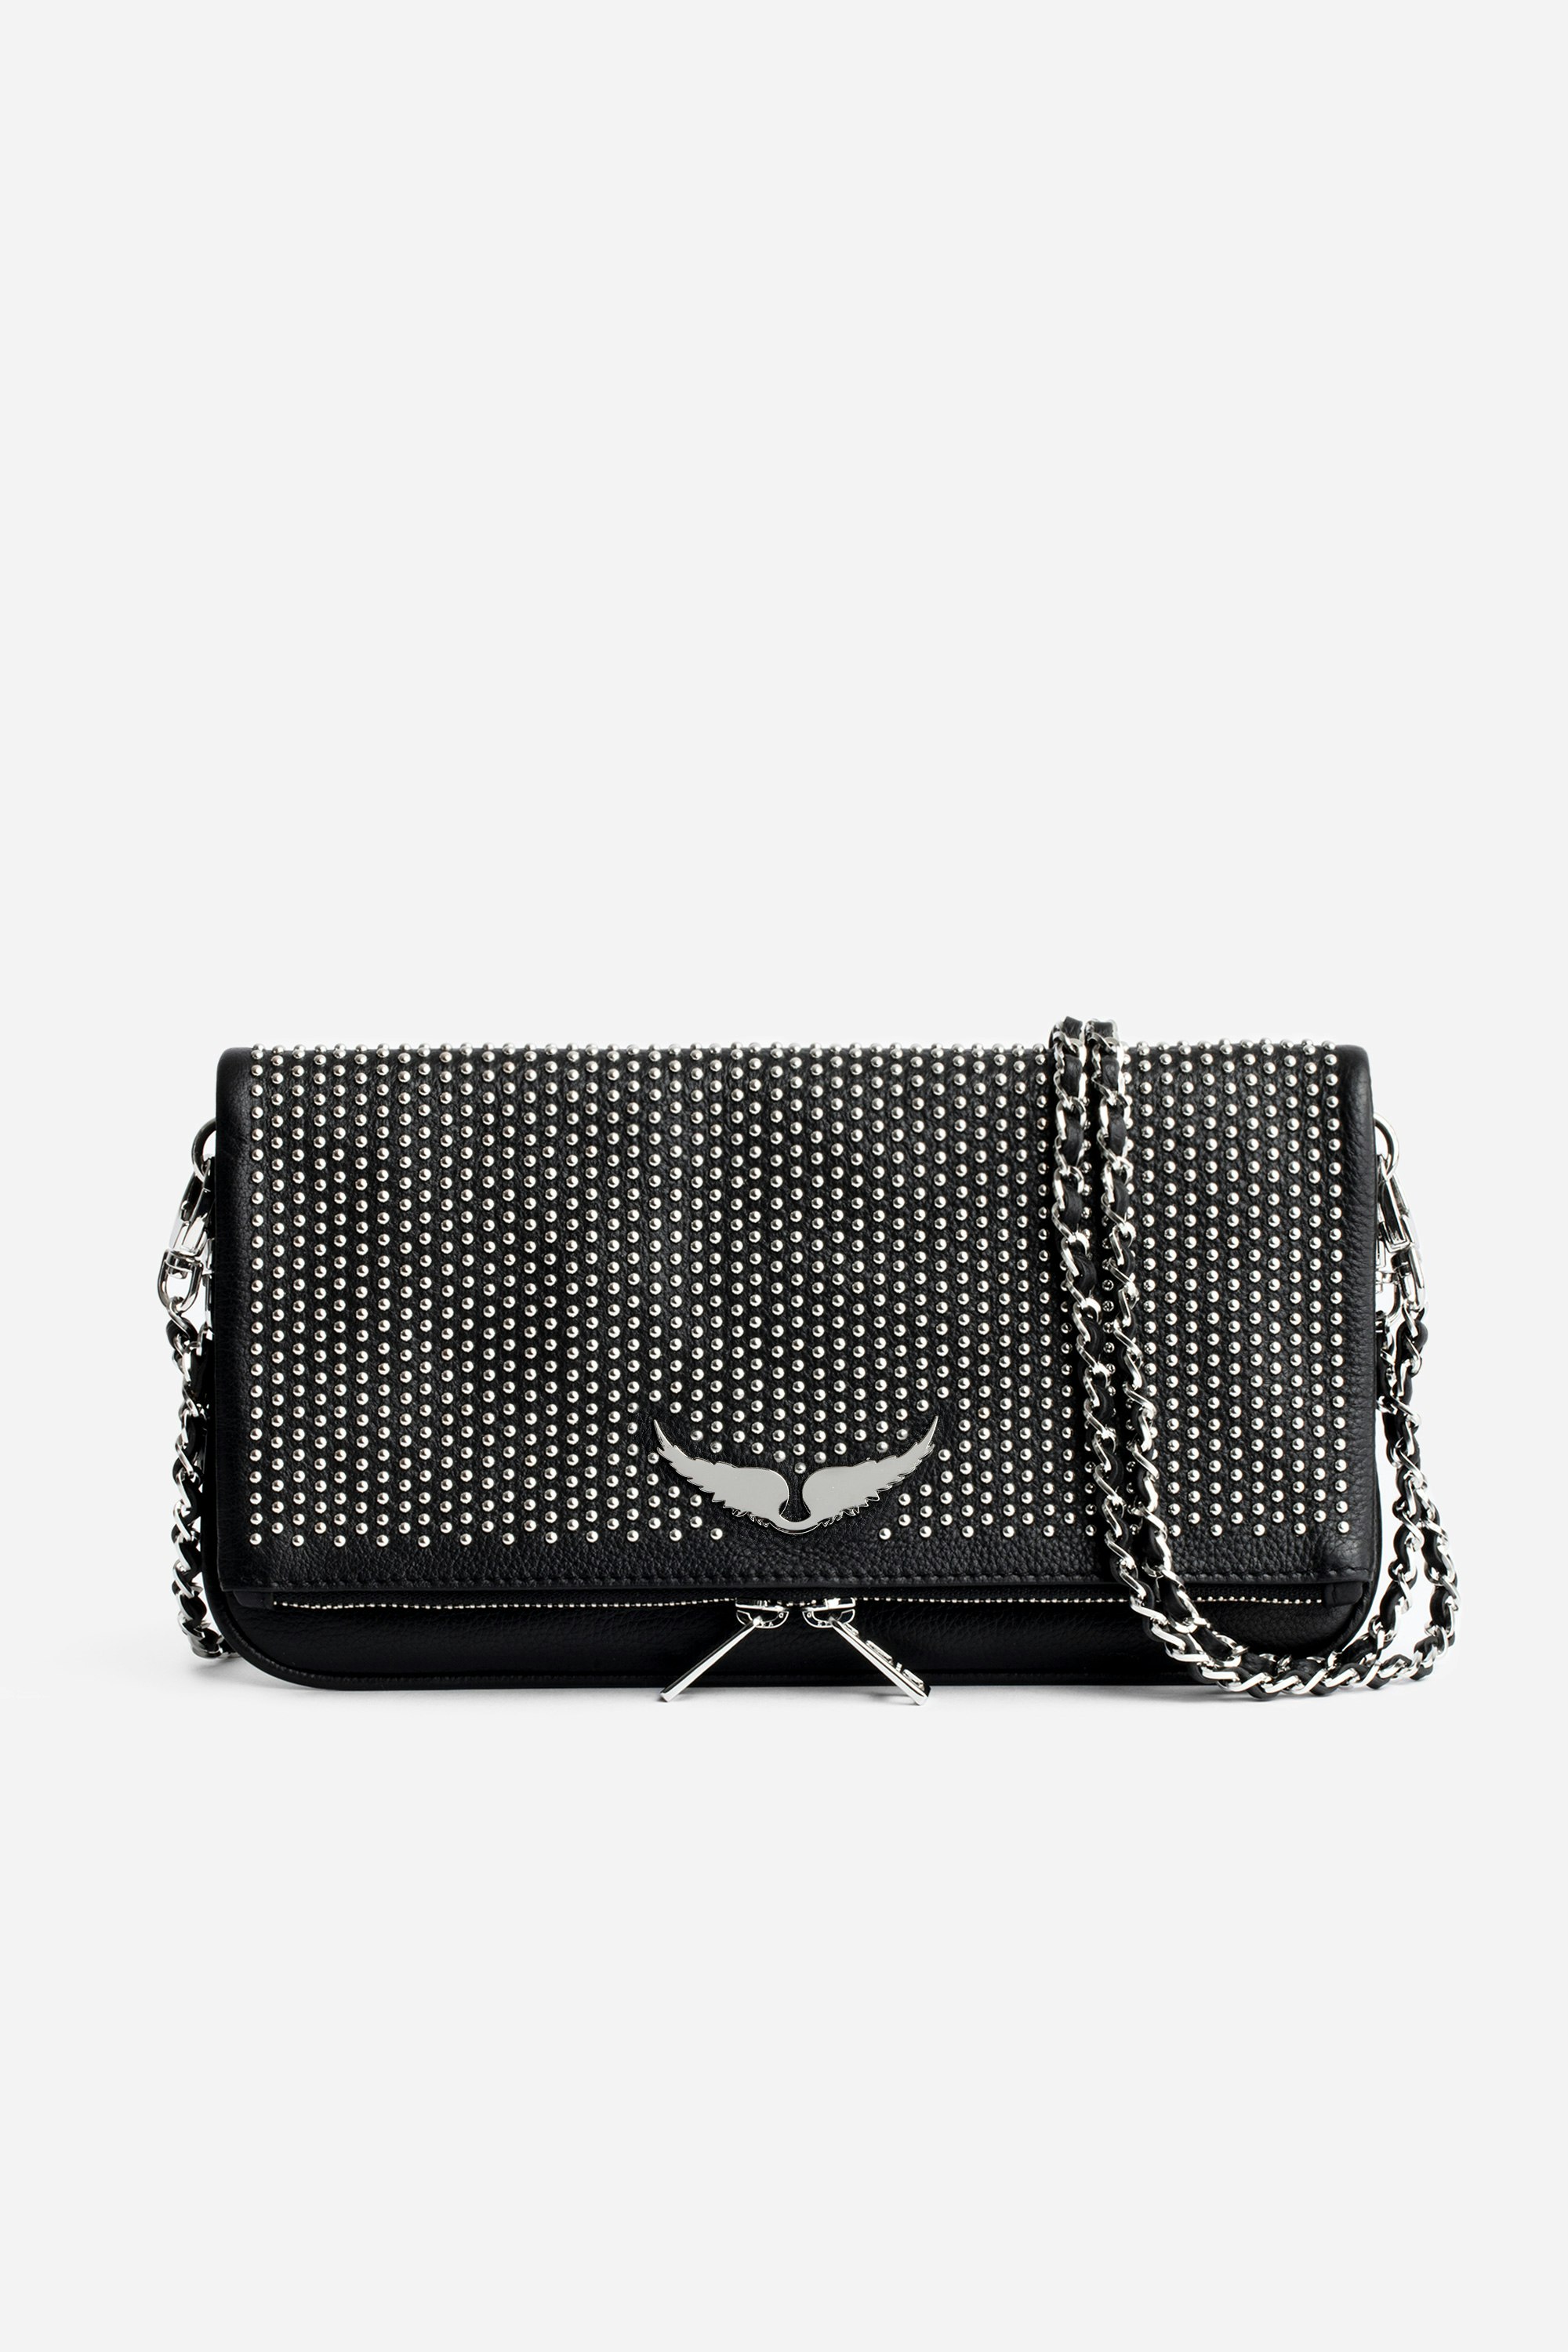 Rock Dotted Swiss Clutch - Women’s black grained leather clutch with dotted Swiss studs and a double leather and metal chain strap.